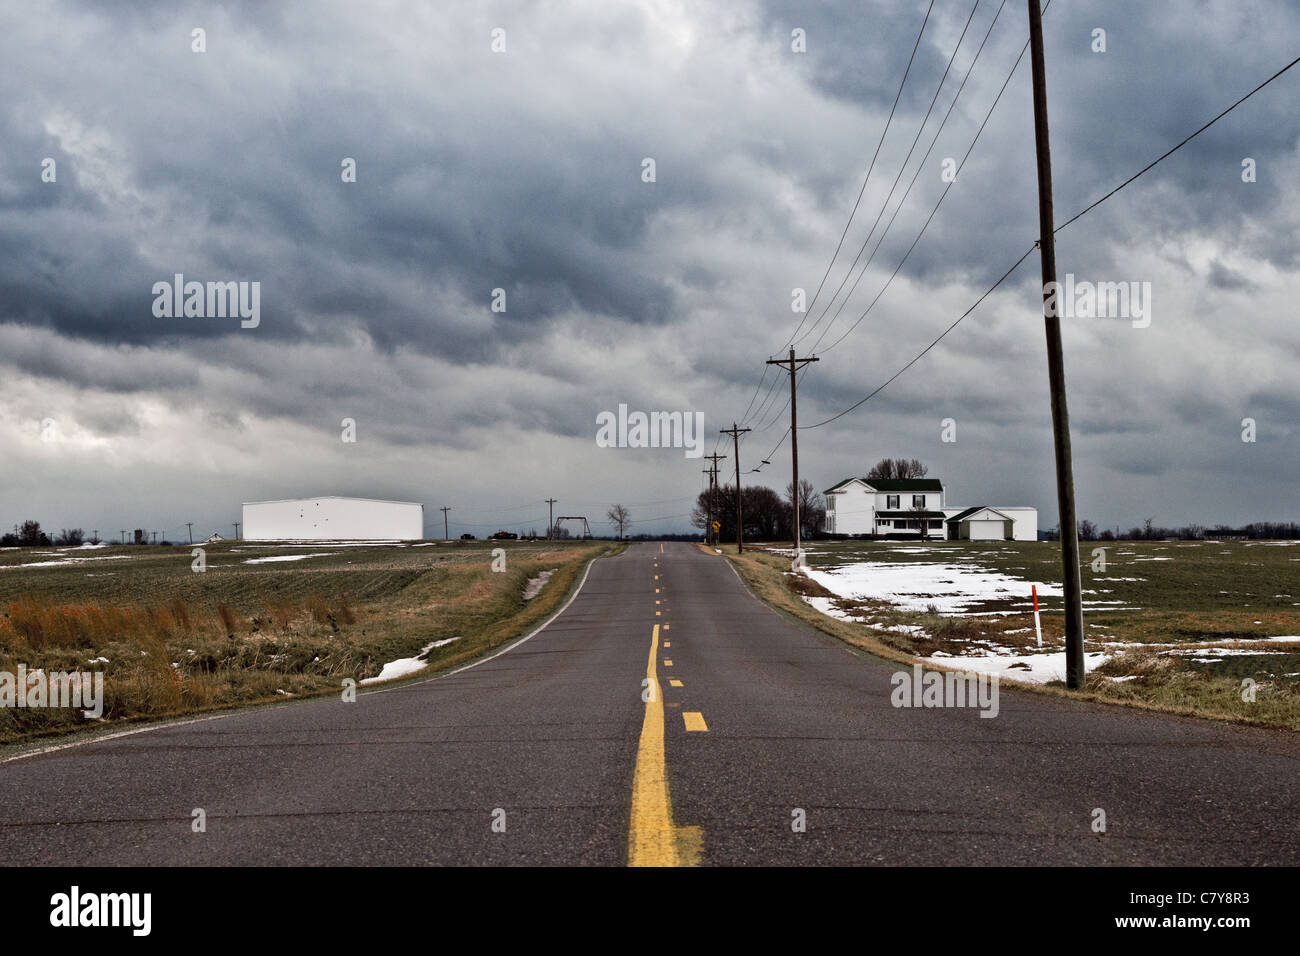 Long road leading into a storm in a rural environment Stock Photo